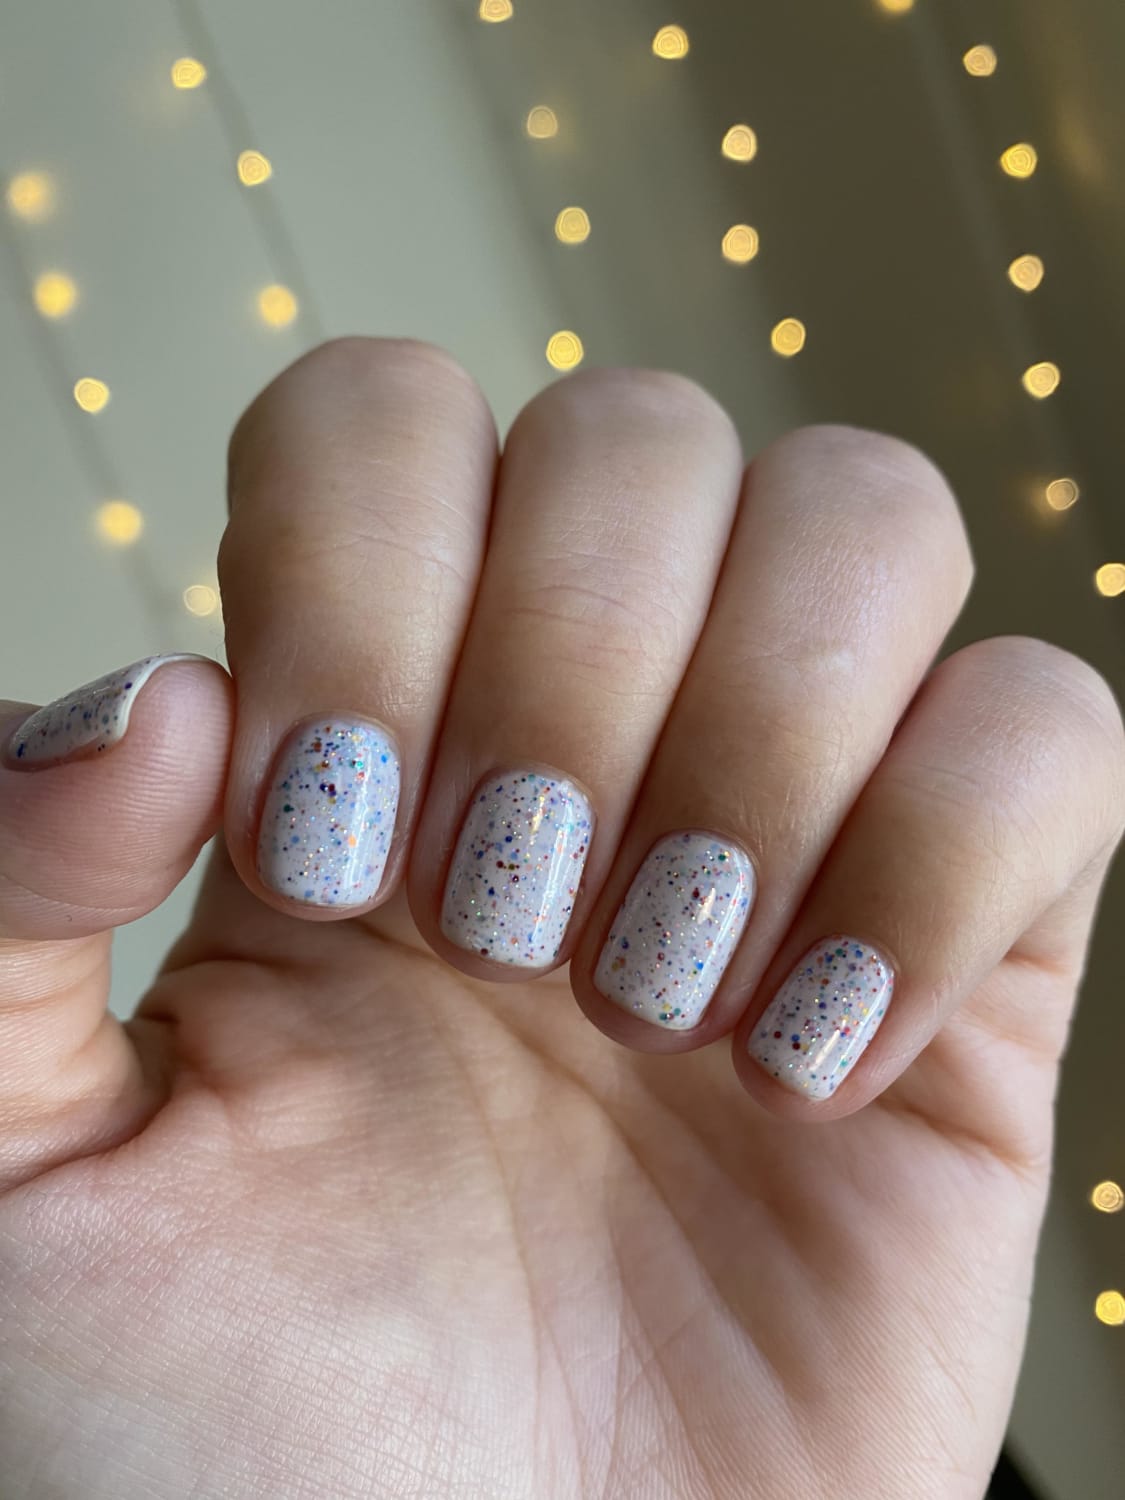 I love using nail polish to brighten my mood! This is how I add a little bit of joy and sparkle to each day.